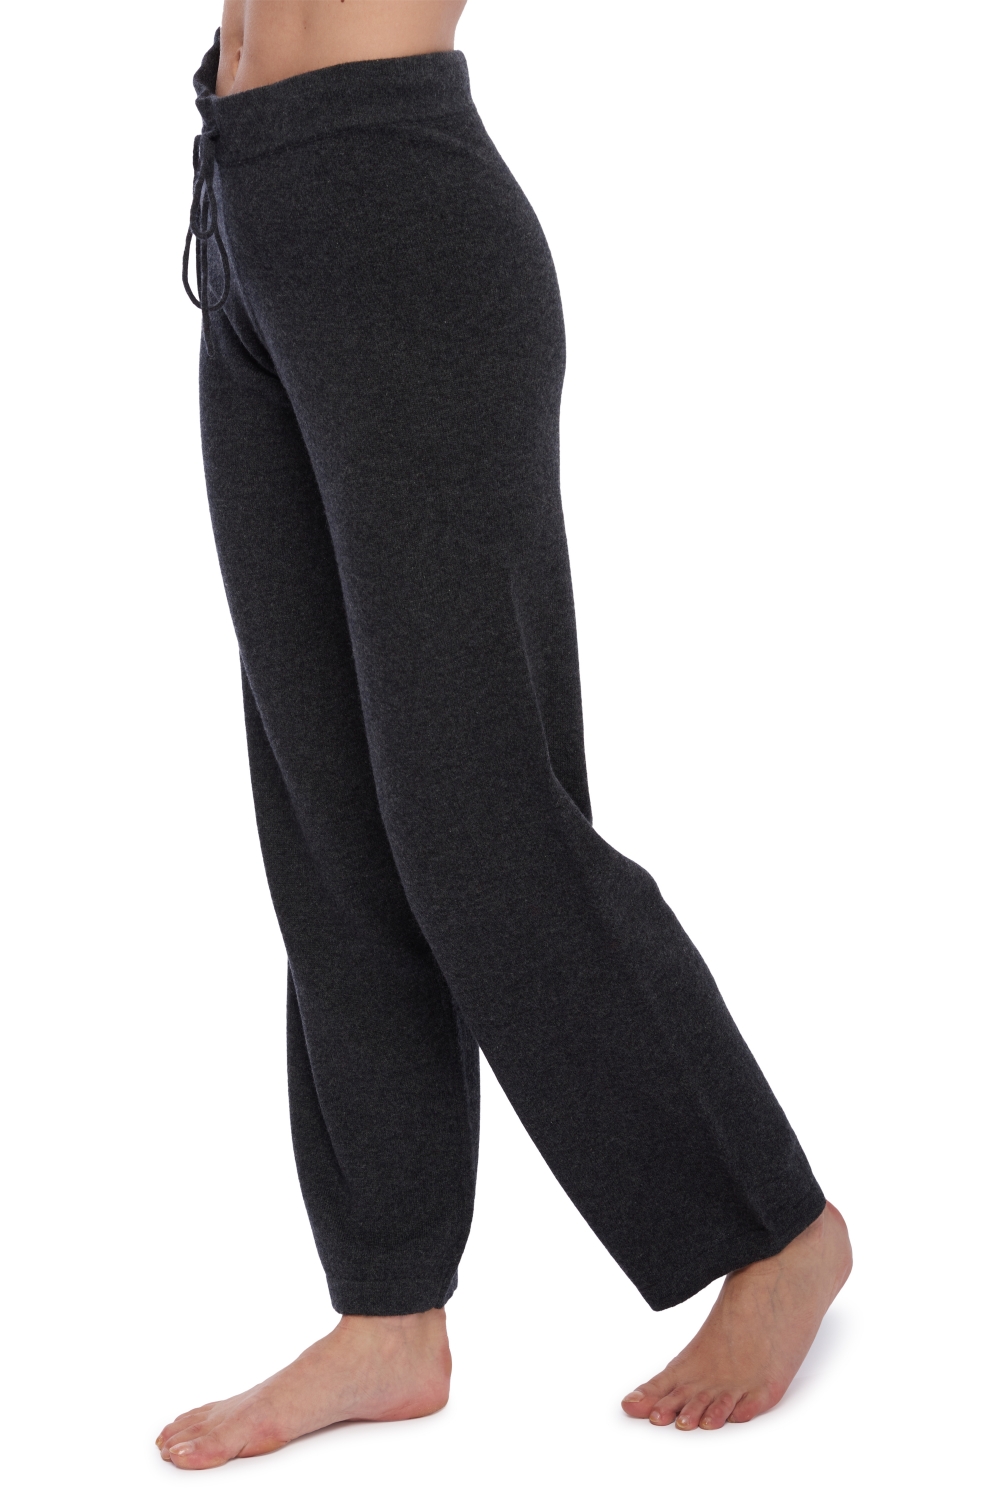 Cashmere ladies trousers leggings malice charcoal marl m